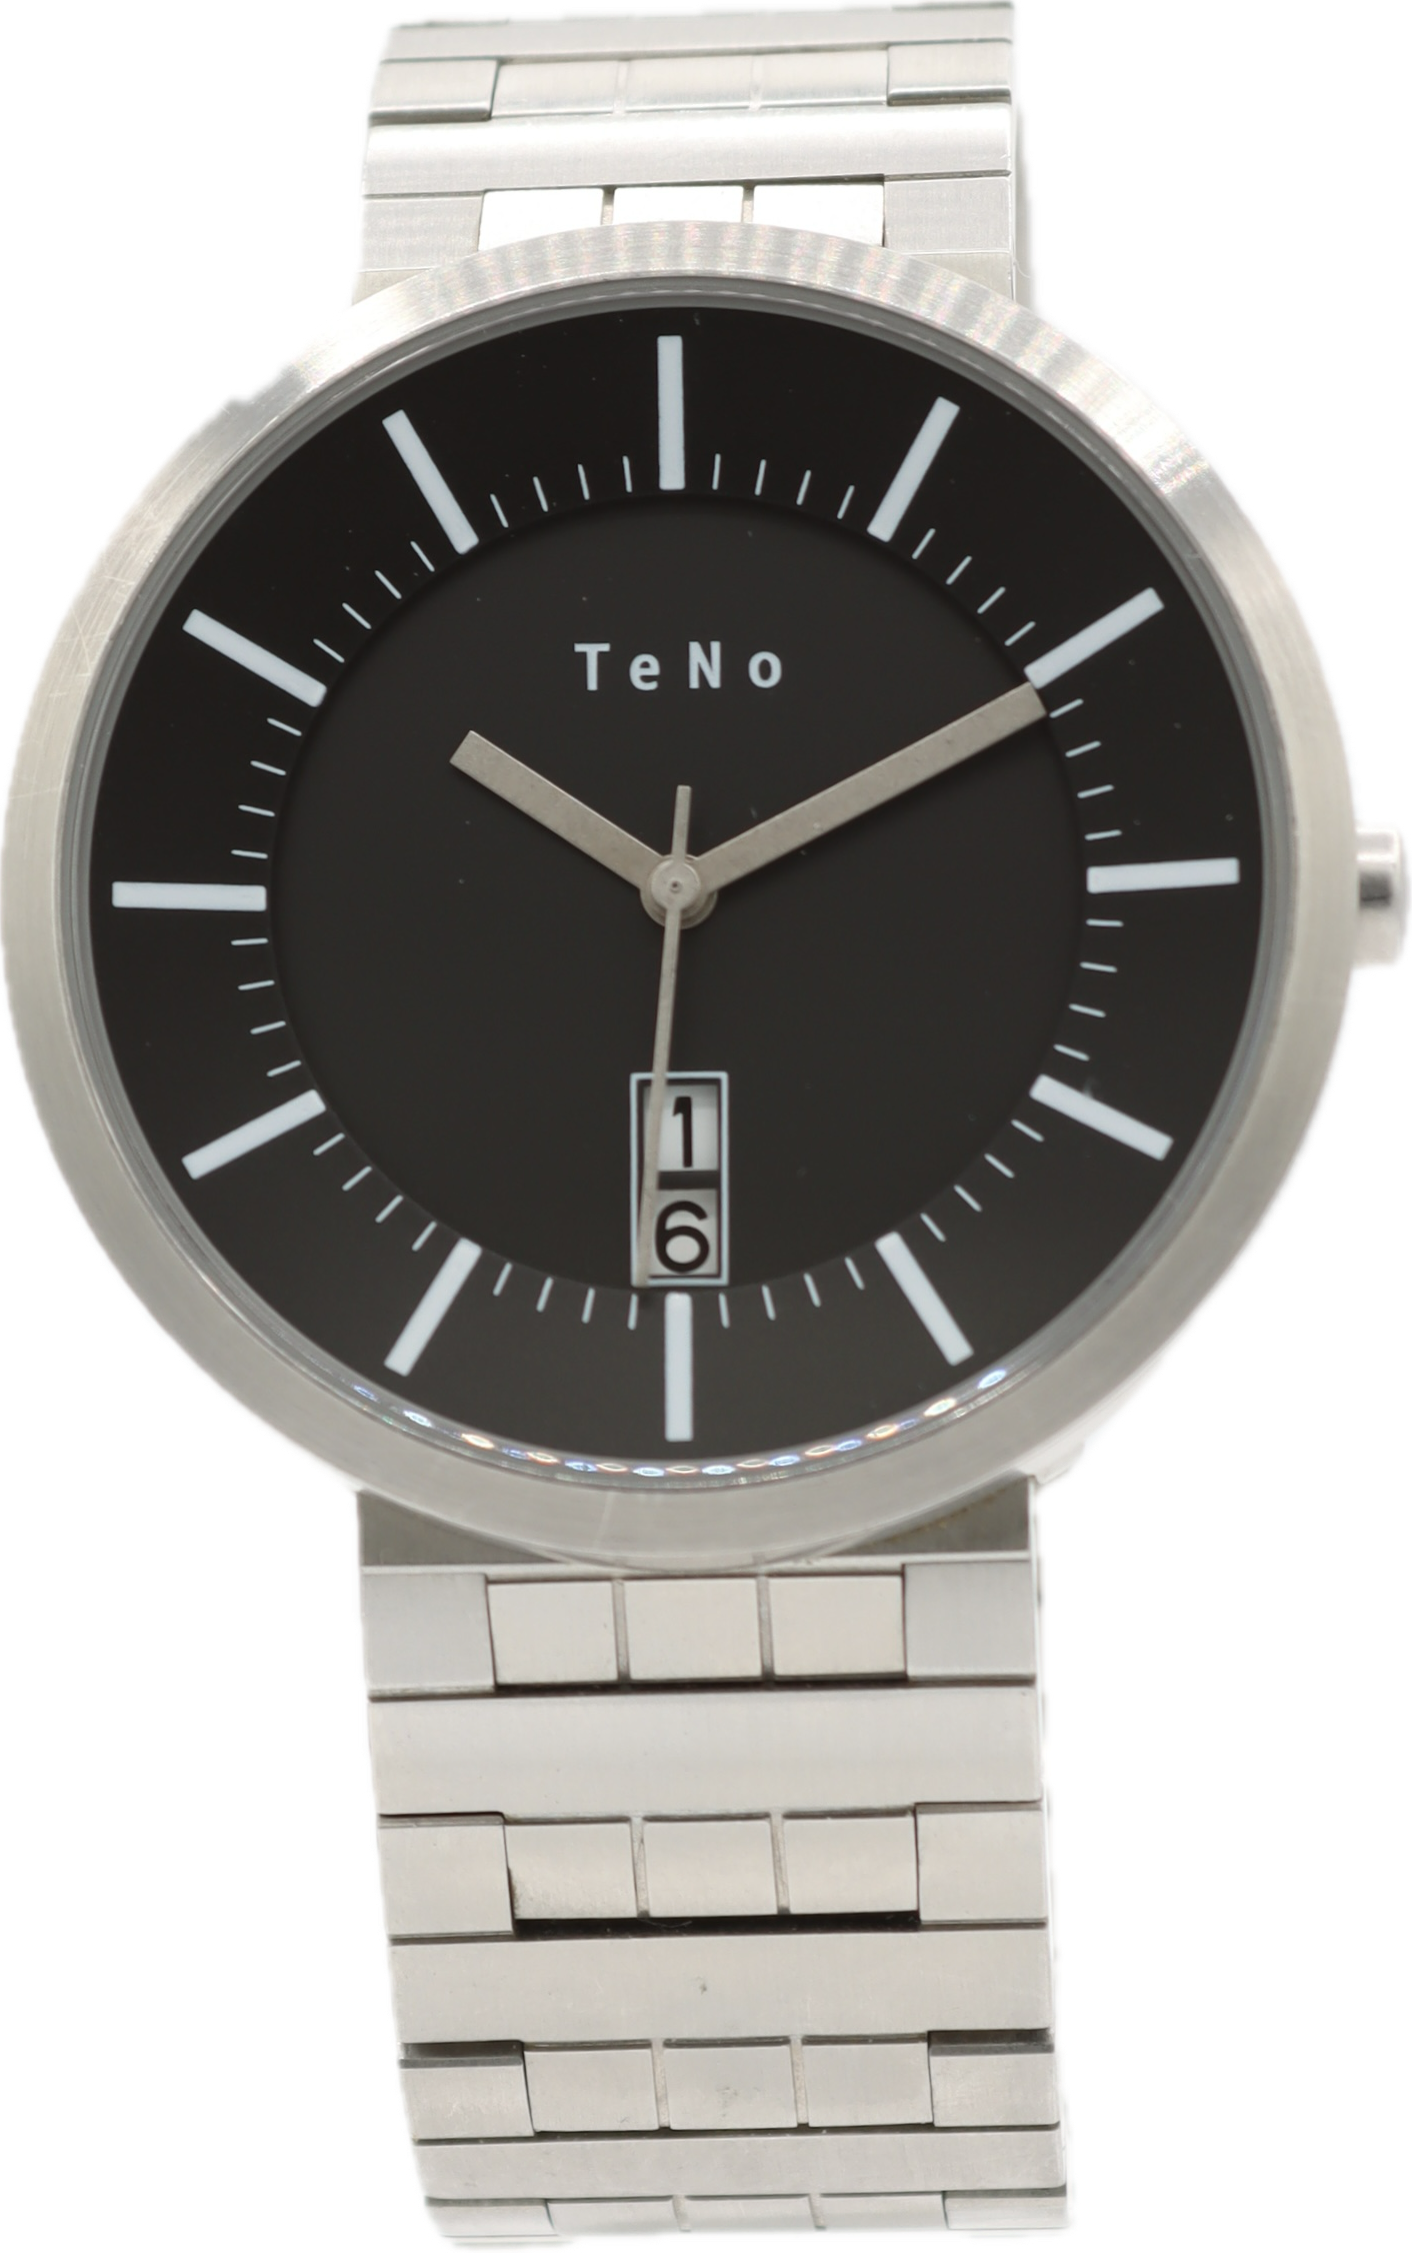 Venezianico Nereide Tungsteno 39mm 3121541C OFFICIAL DEALER-OR... for  Rs.70,666 for sale from a Trusted Seller on Chrono24